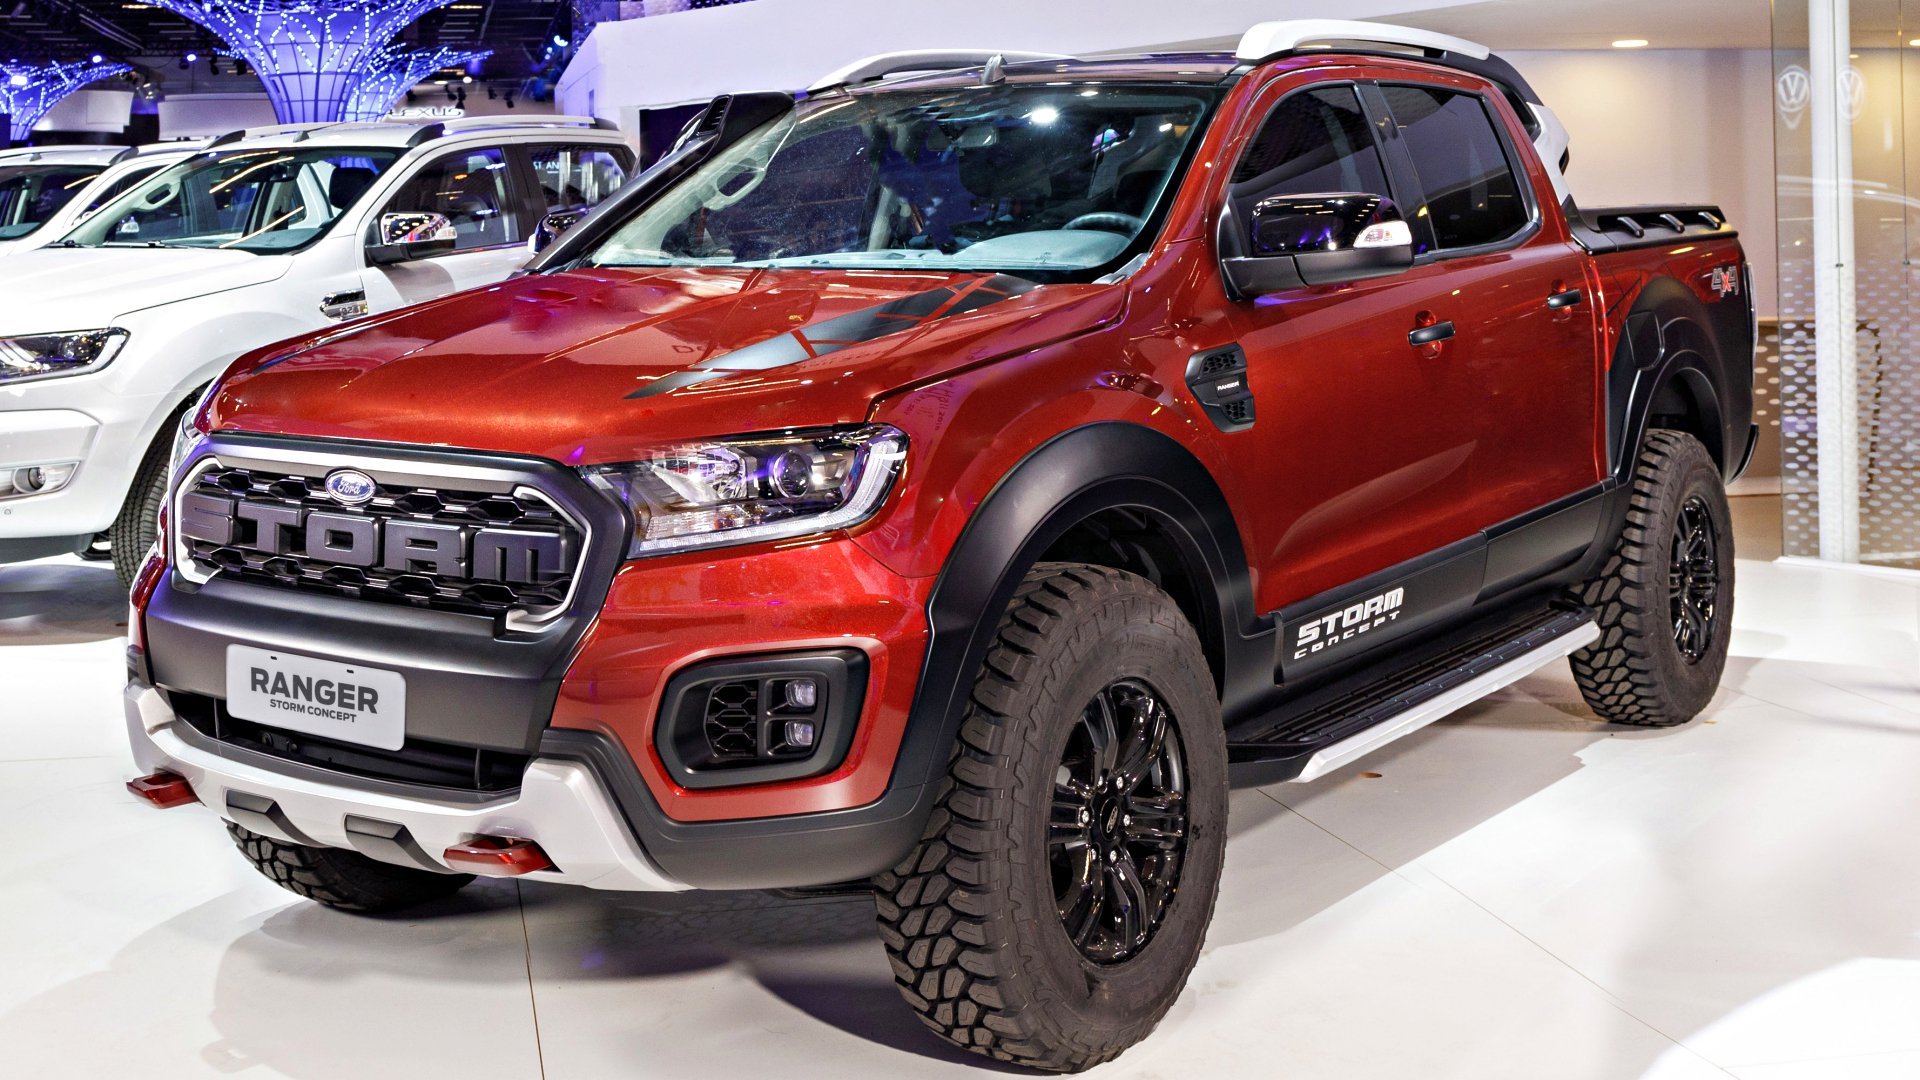 News Ford Ranger Storm Concept Debuts In Brazil We Want, Now